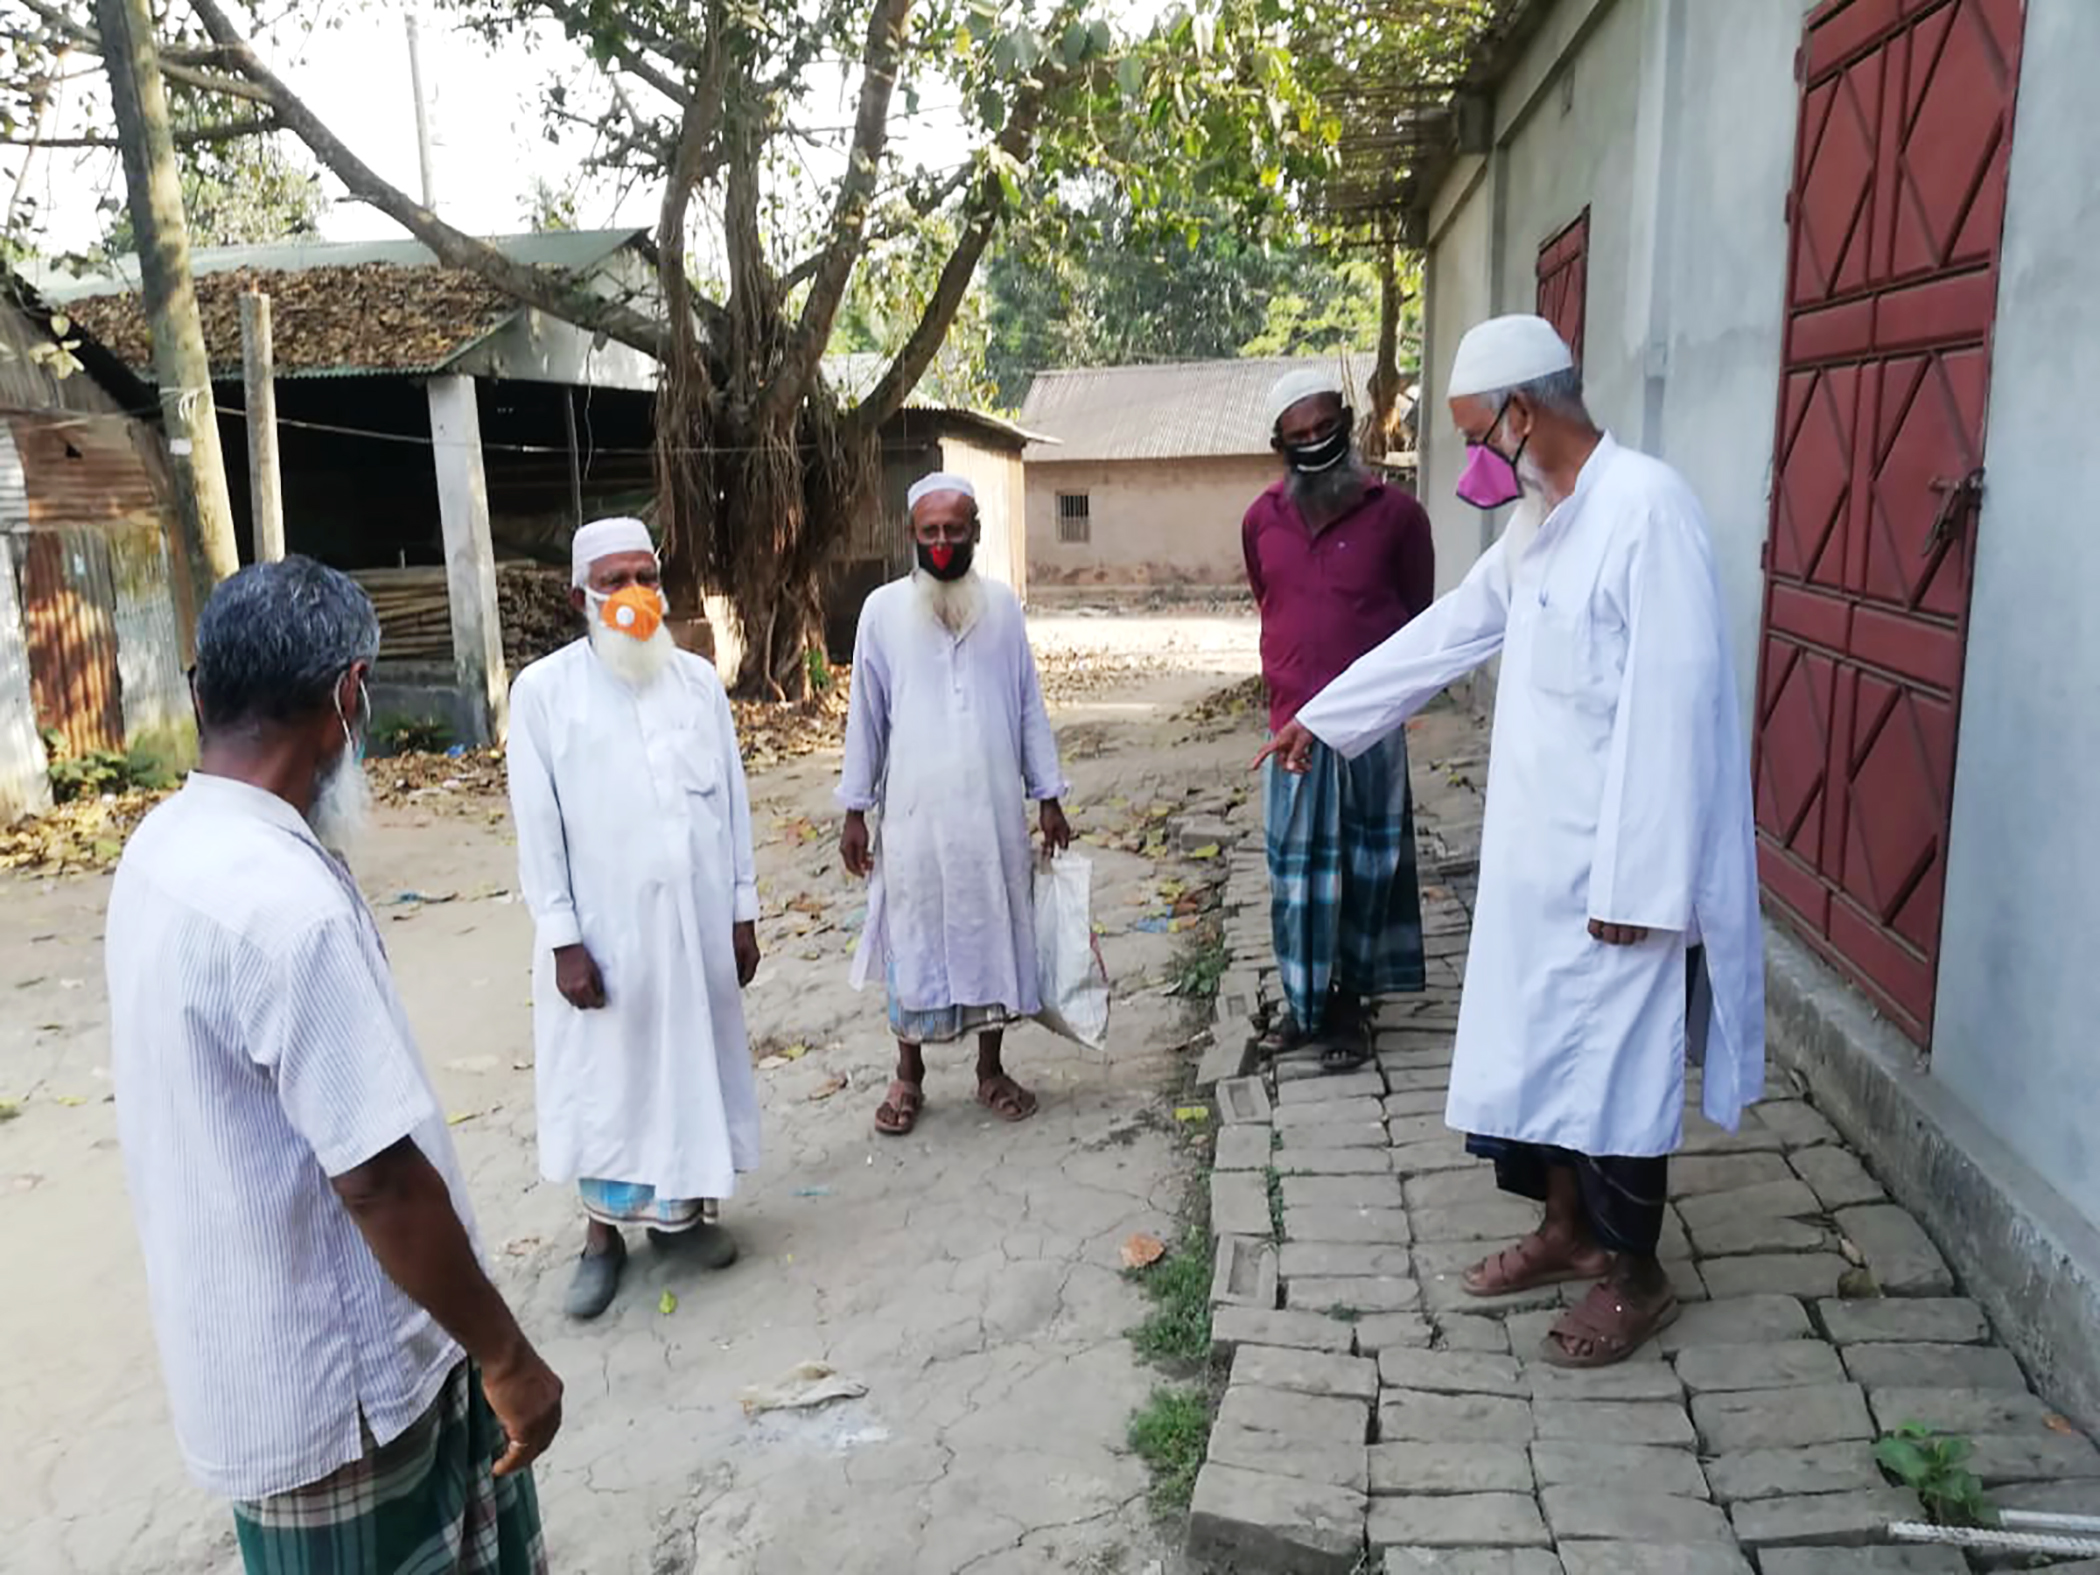 Md. Motiyar Rohman, member of Jalchatra Bazar Mosque Committee was instructing devotees how they should keep maintaining Social distance, personal hygiene and frequently hand washing. He also suggested them not to come to mosque but pray at home.